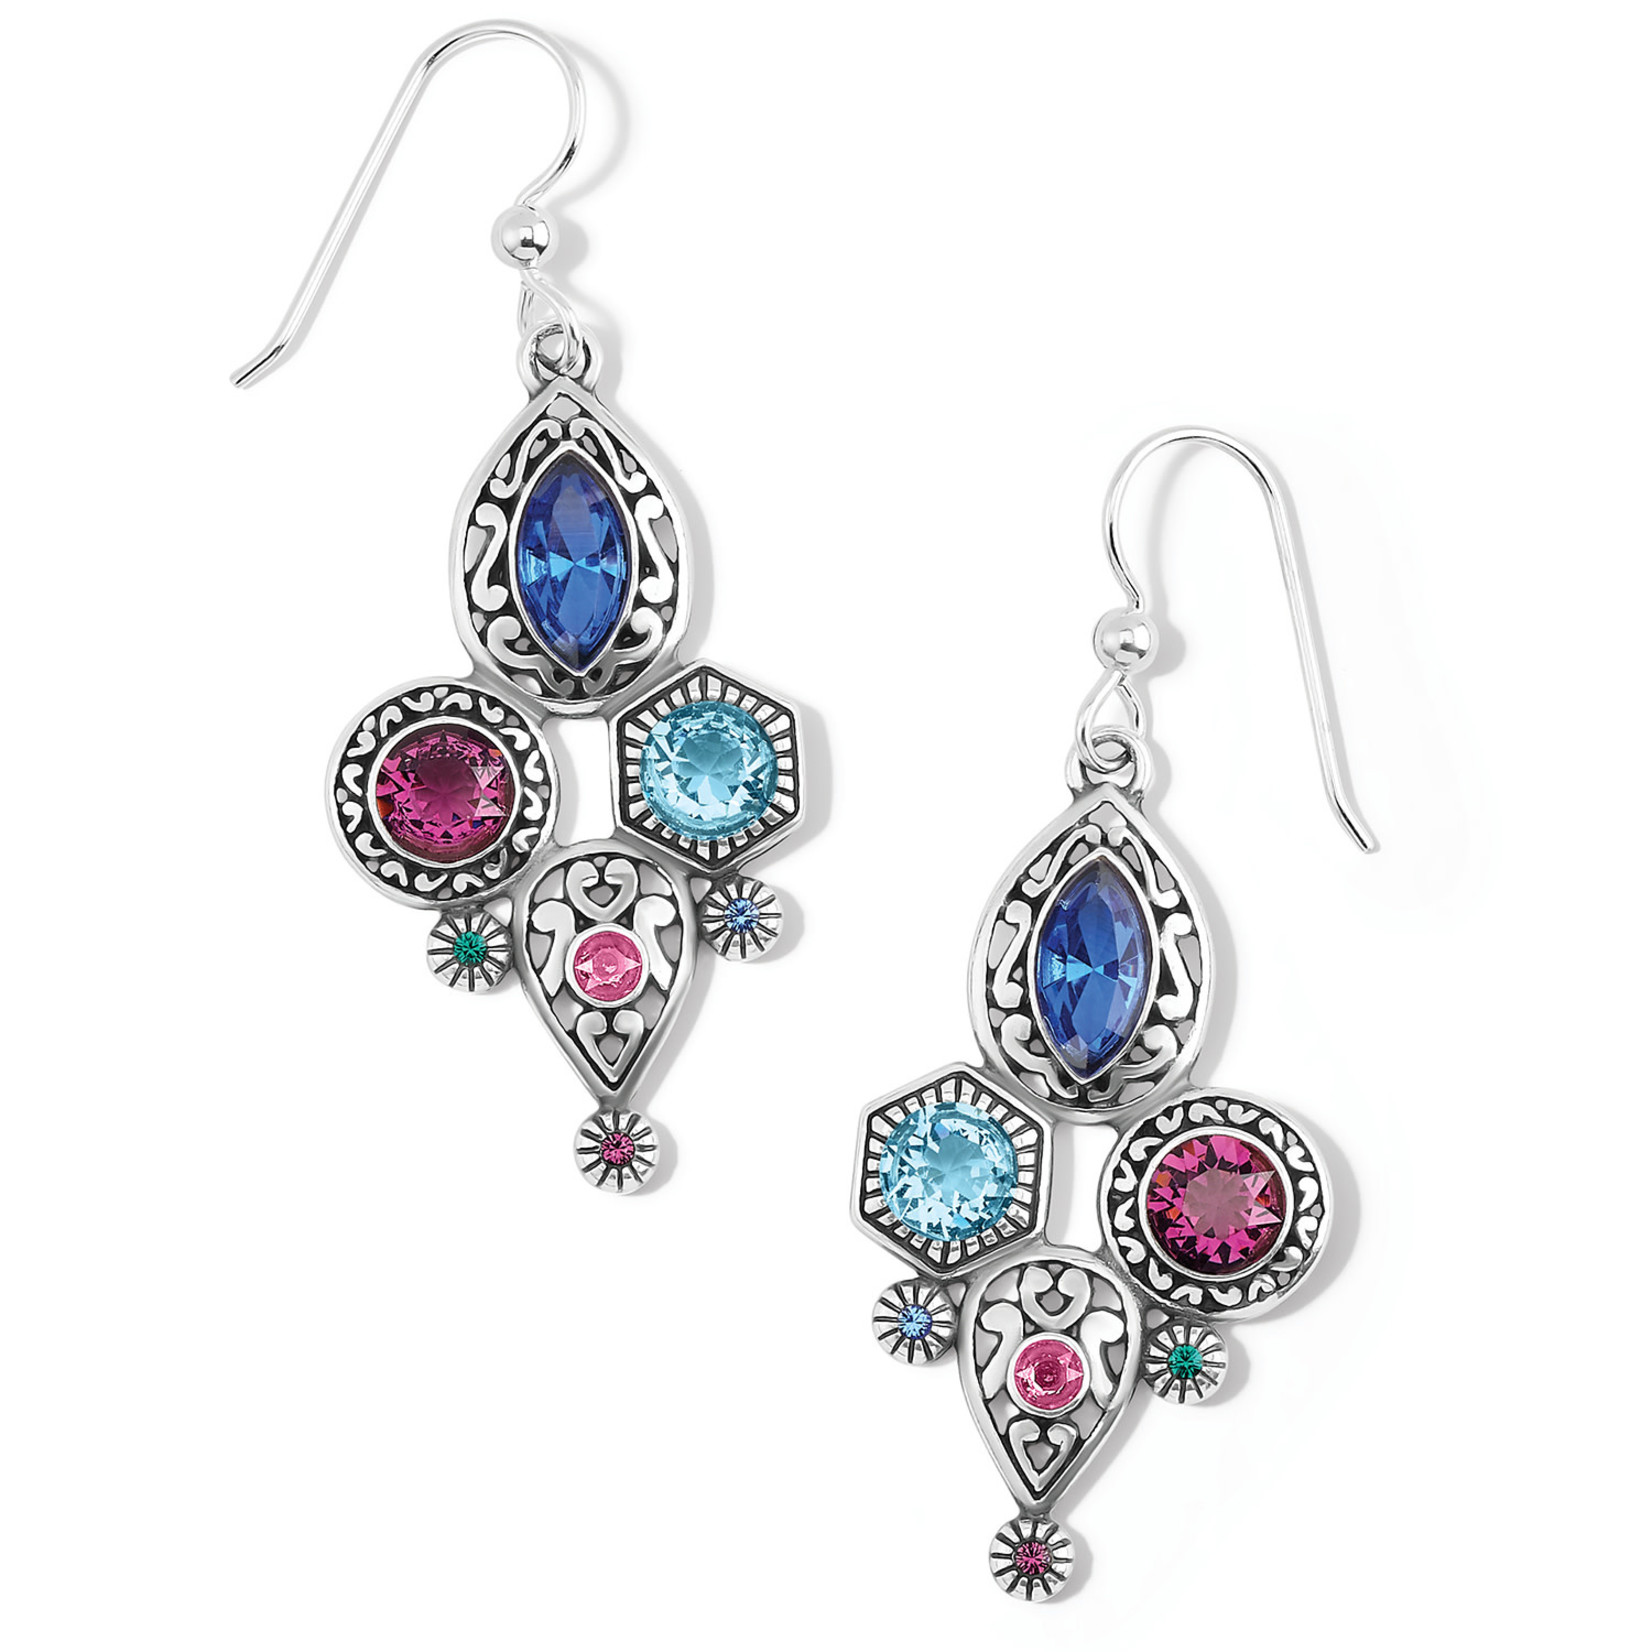 Brighton Elora Gems Cubist French Wire Earrings